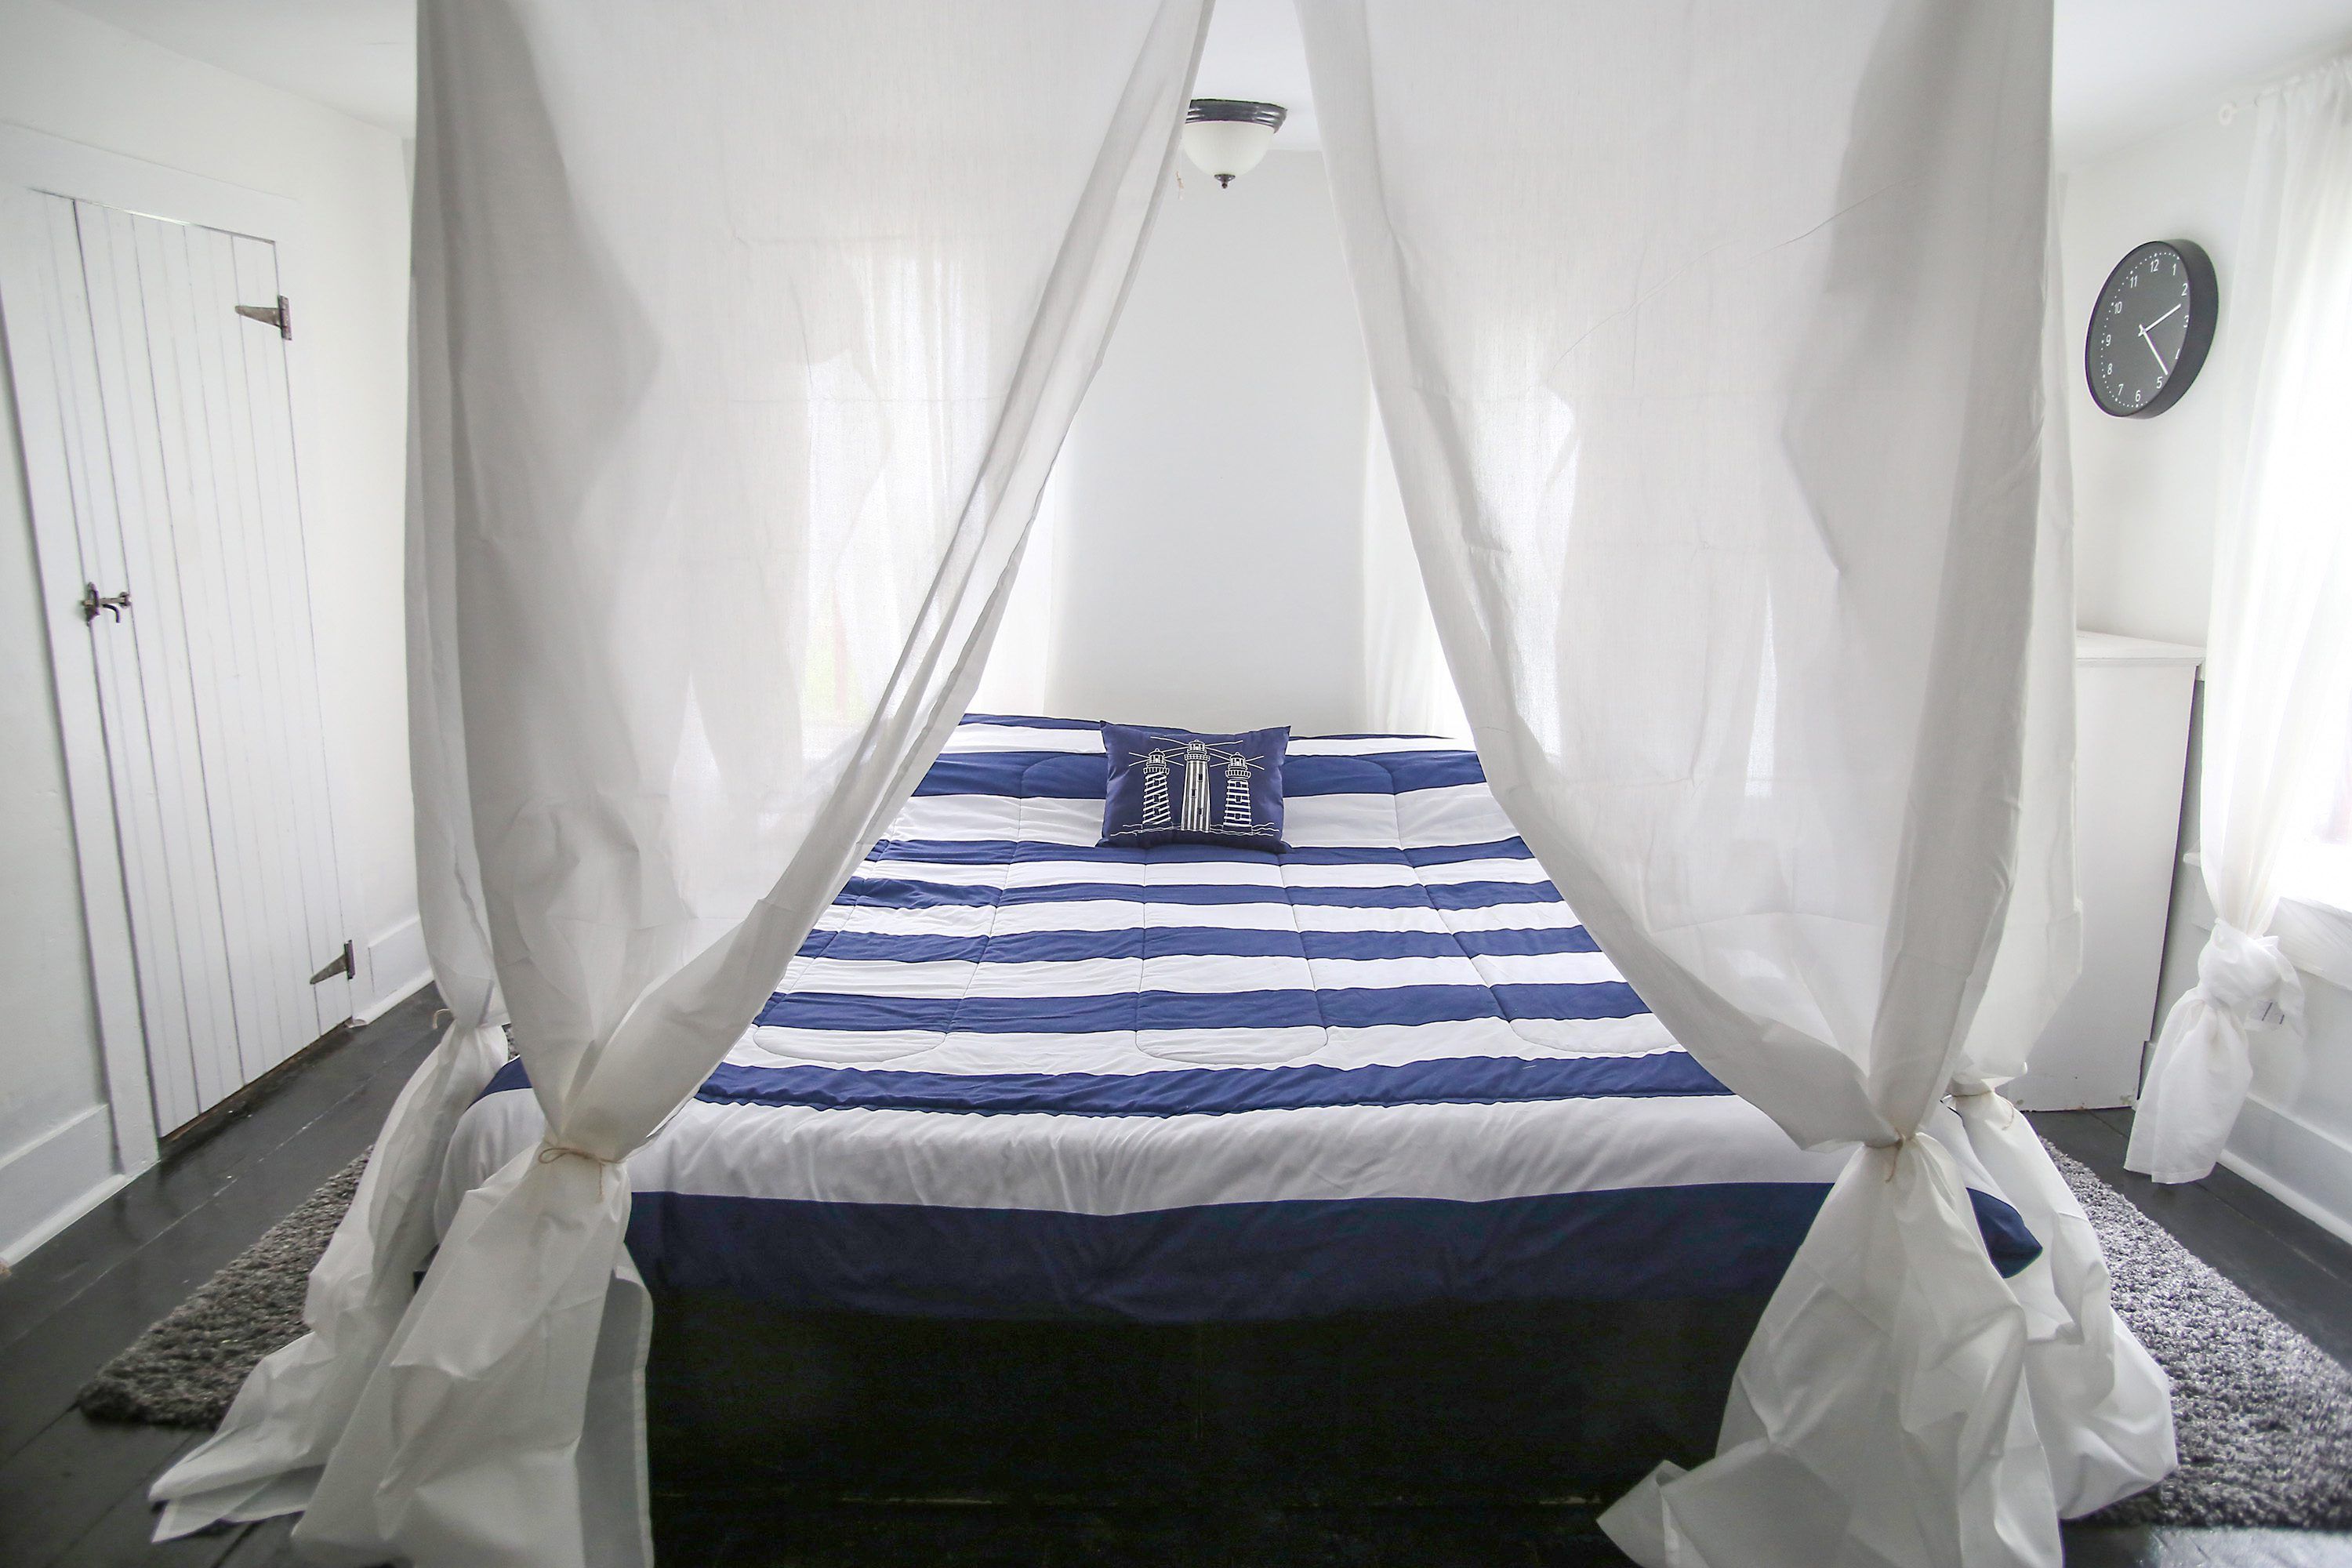 How To Hang Bed Canopy Without Drilling